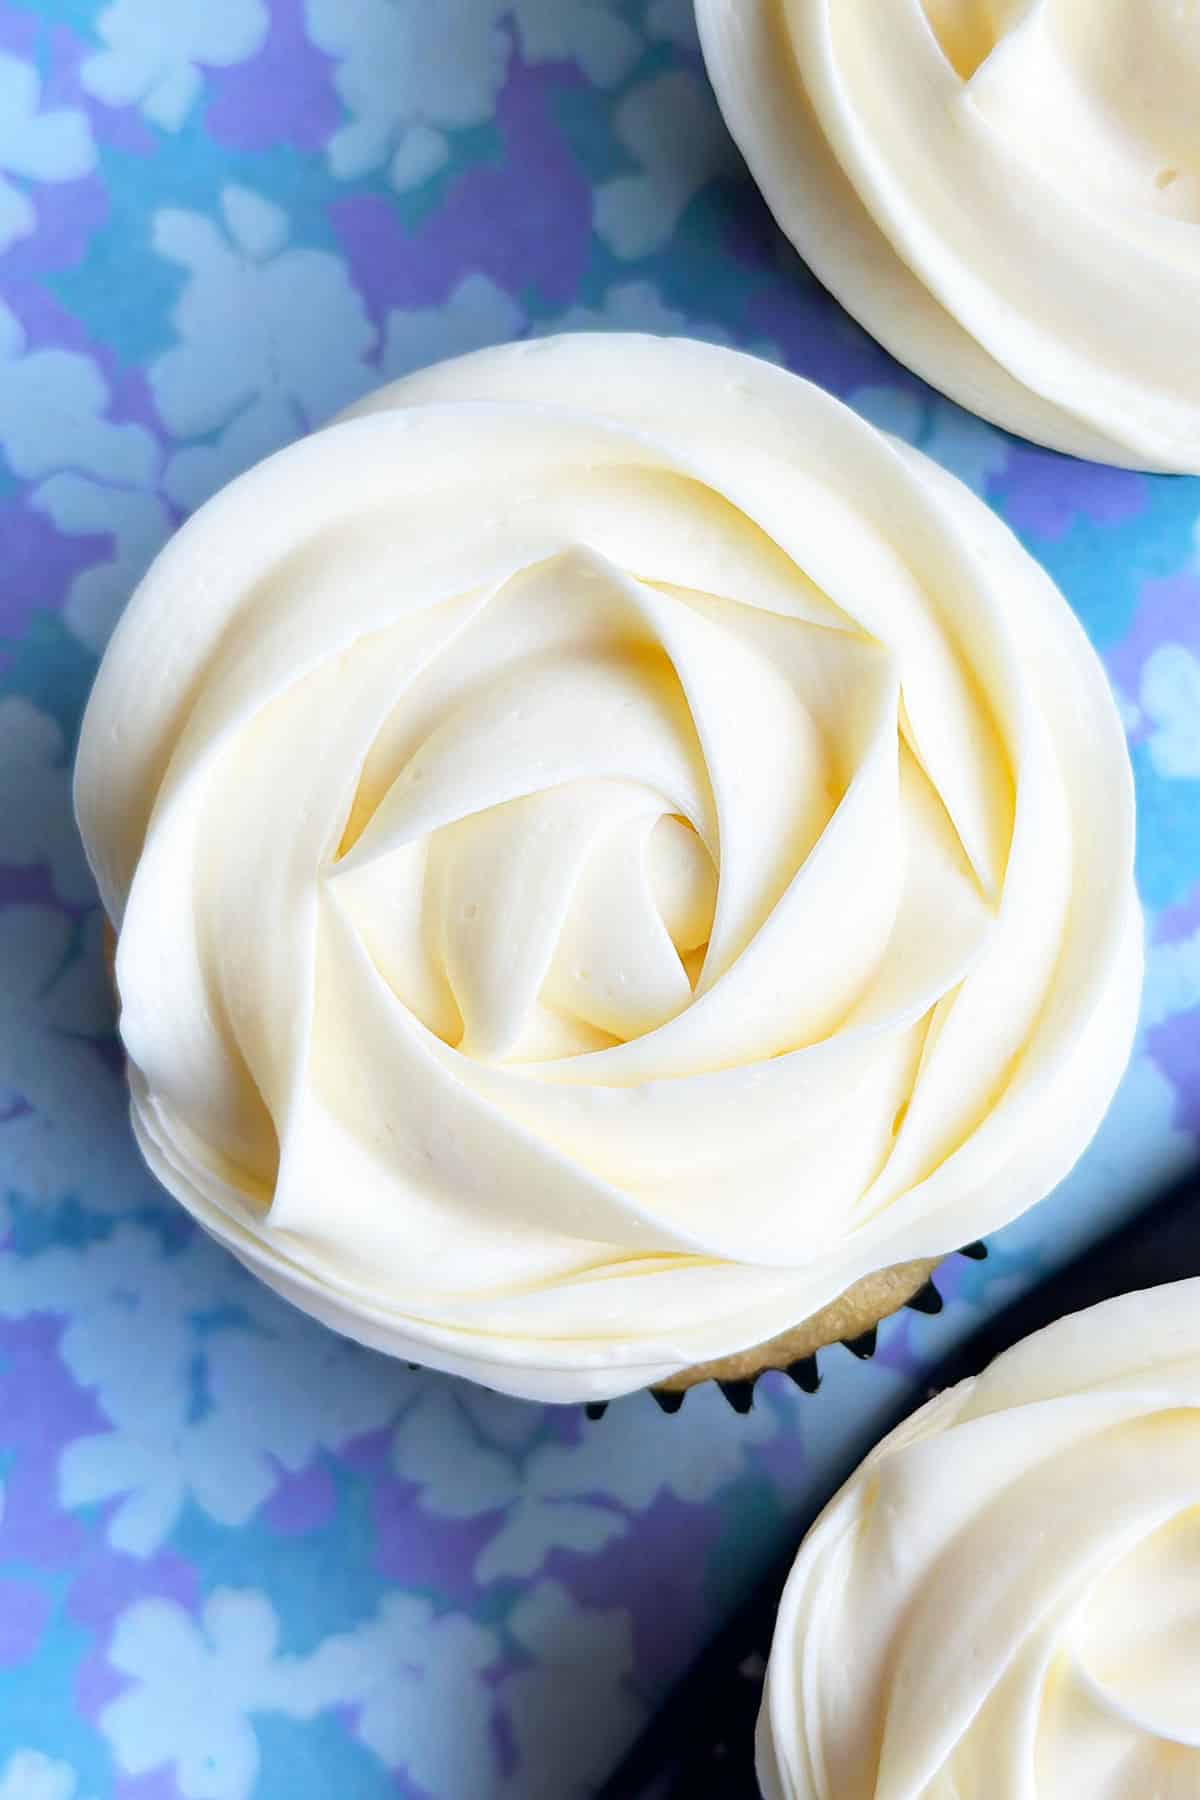 Best Homemade Almond Icing Piped on Top of Cupcake. 